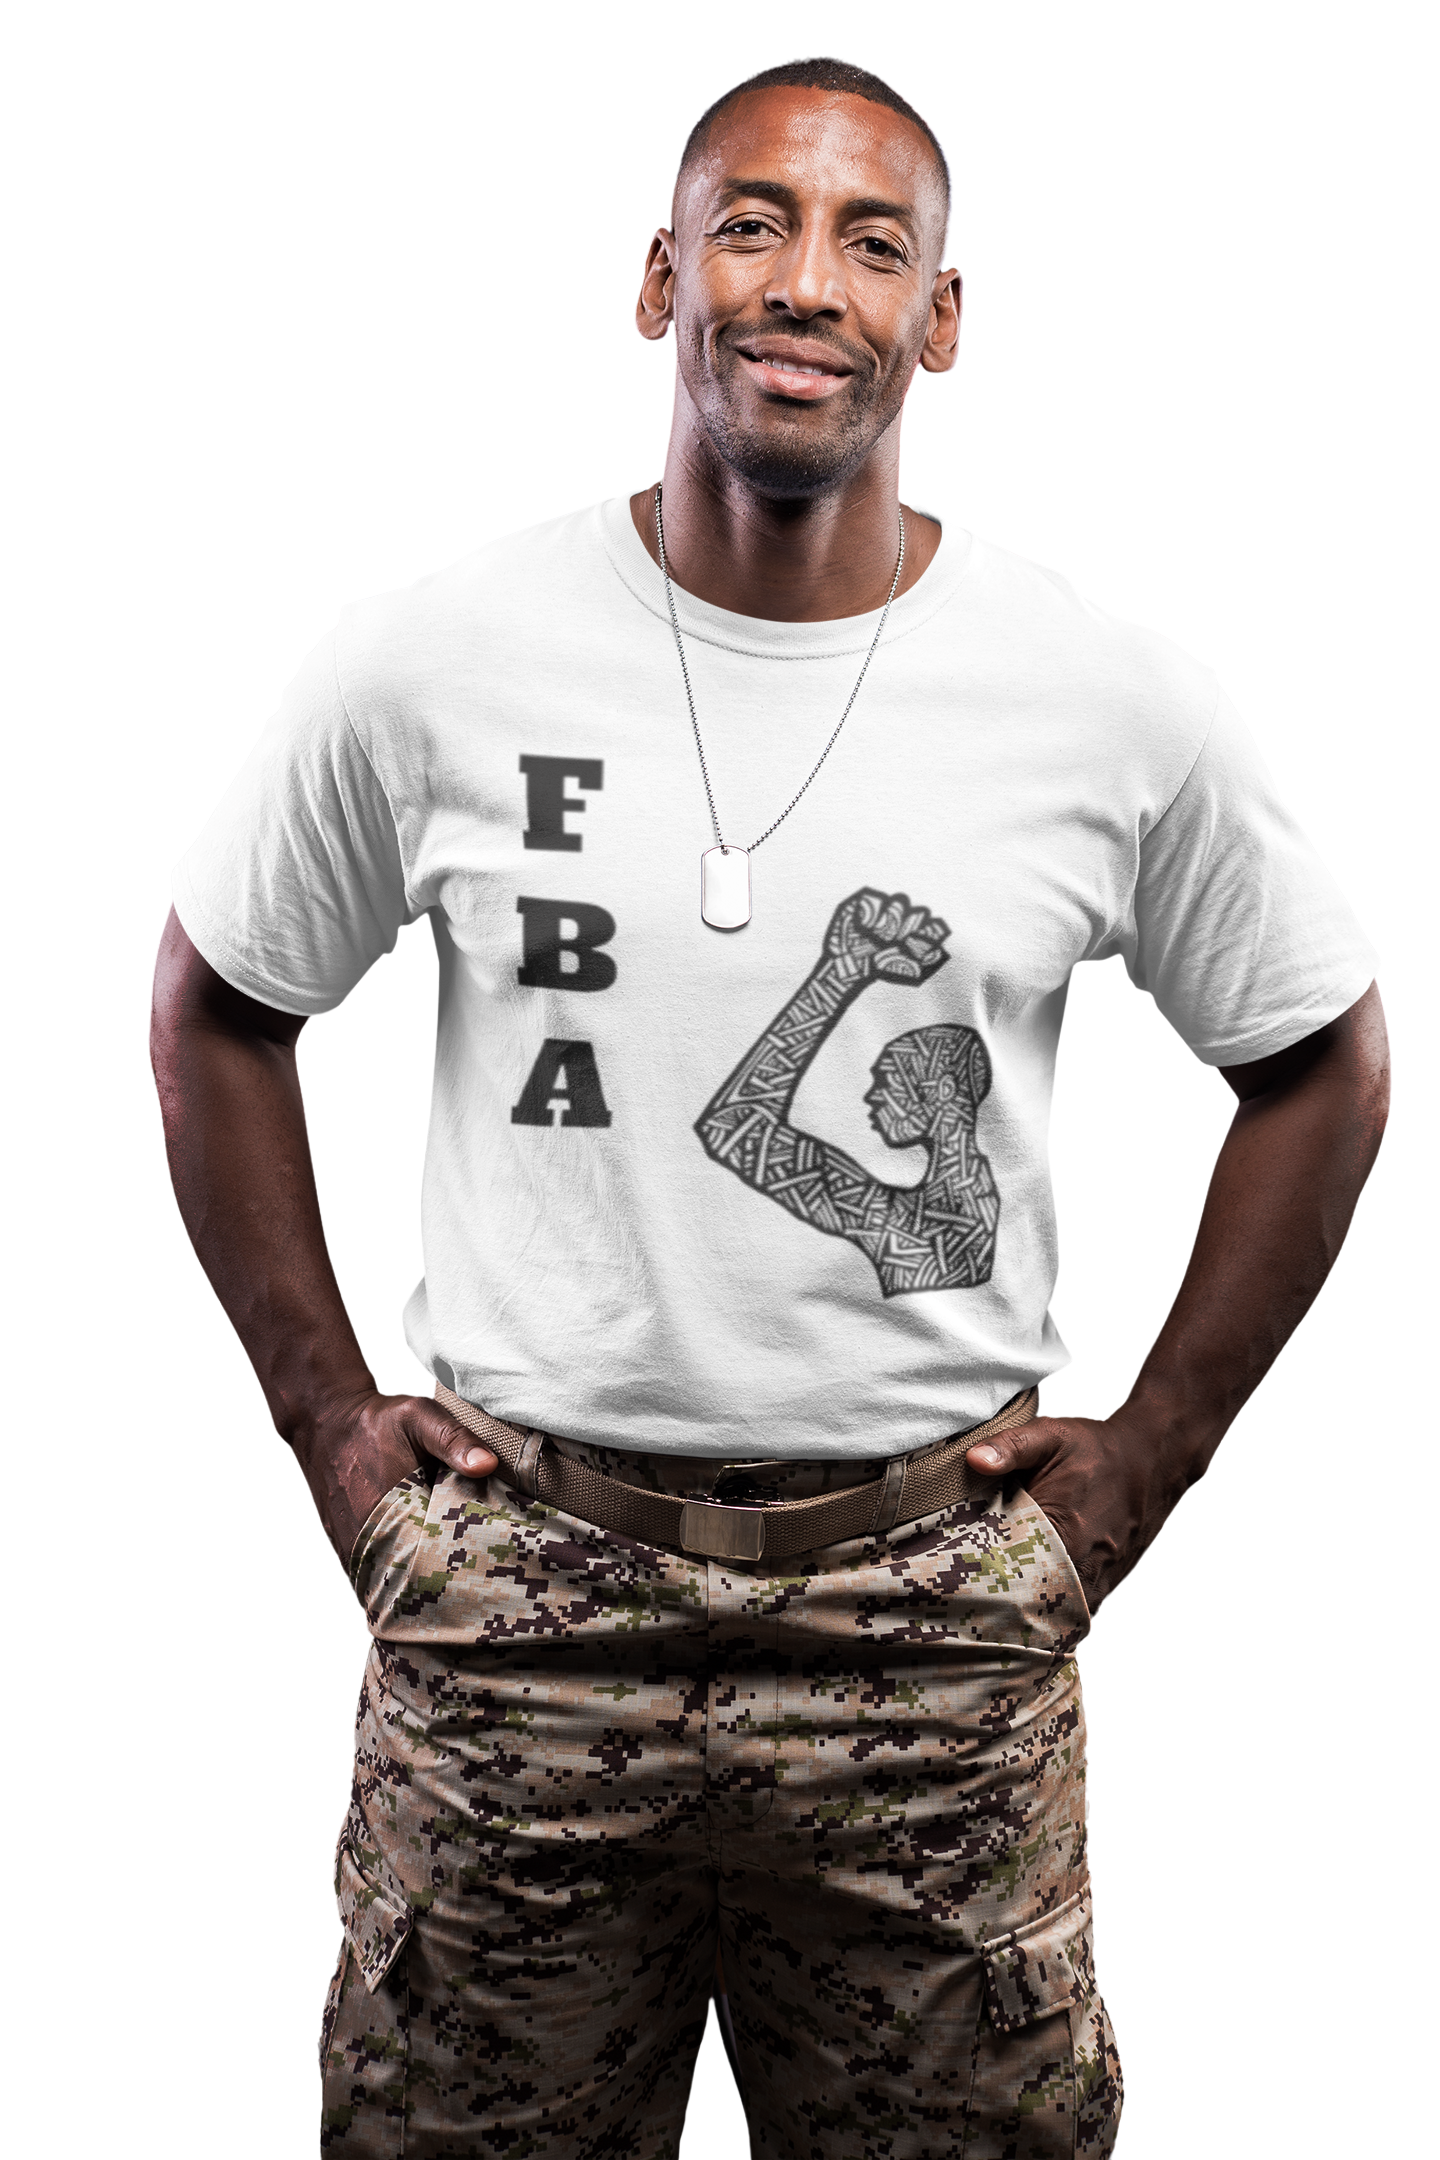 The image features a classic unisex cotton ringer t-shirt with bold "FBA Pride" text prominently displayed on the front. The shirt is designed with contrasting trim on the collar and sleeves, adding a stylish retro touch. The high-quality cotton fabric ensures a comfortable fit, making it perfect for showcasing your heritage proudly.